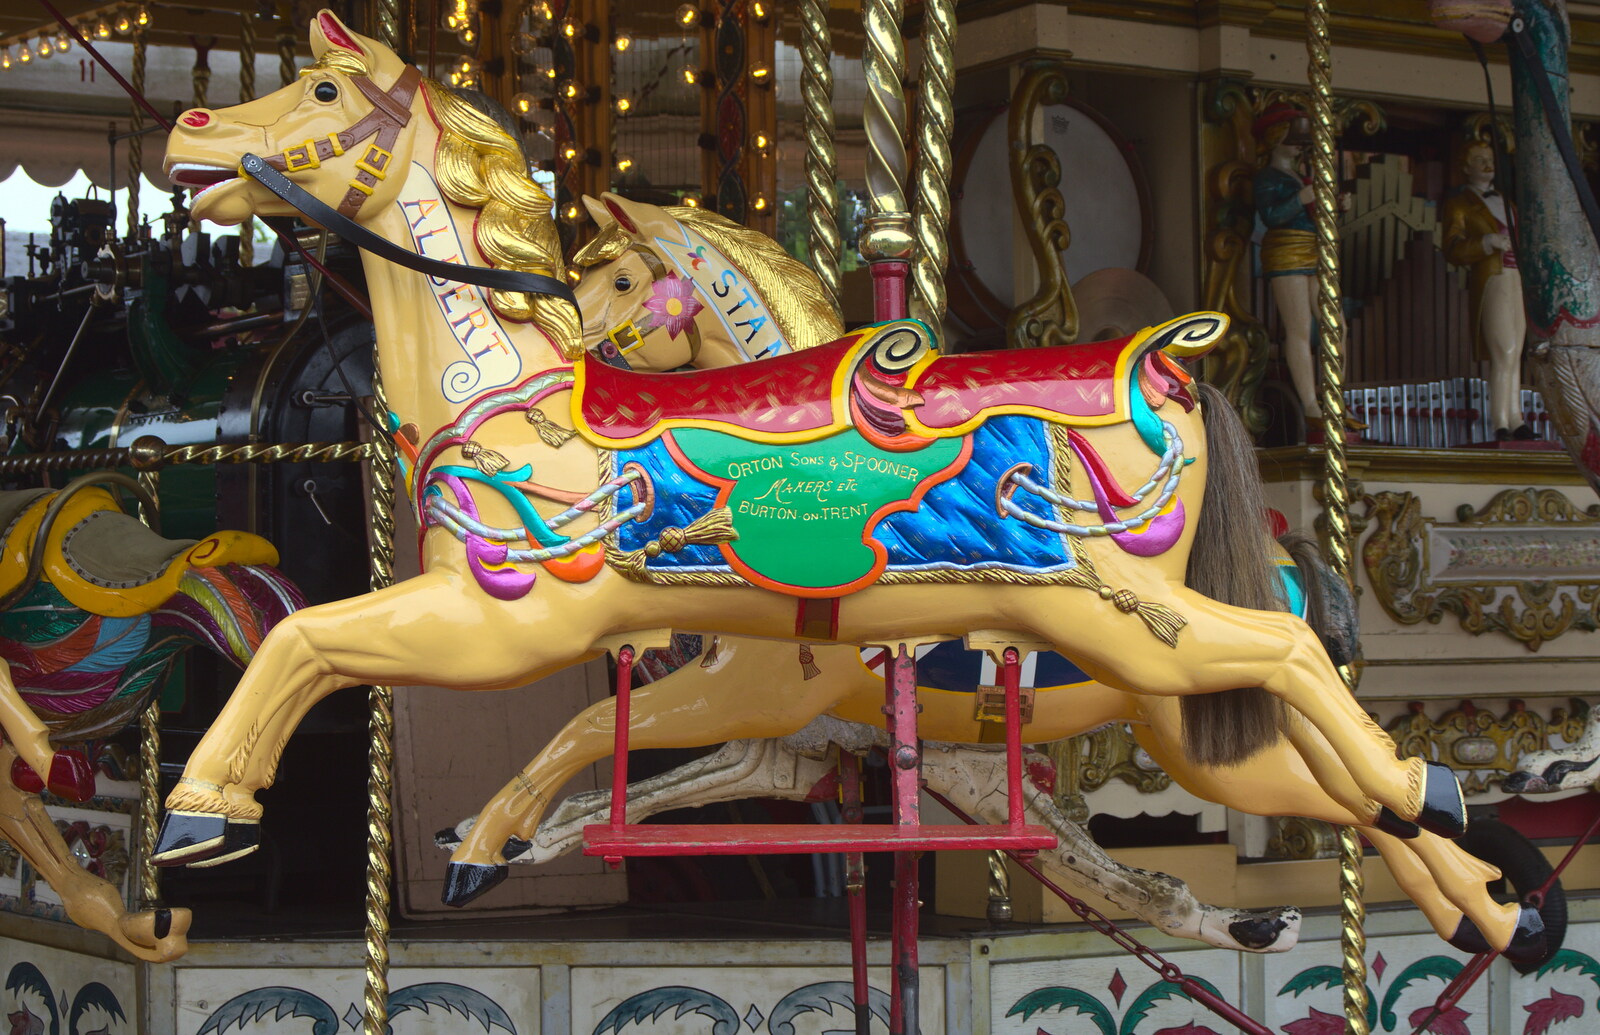 Carousel horses from A Bressingham Steam Day, Norfolk, 27th August 2012